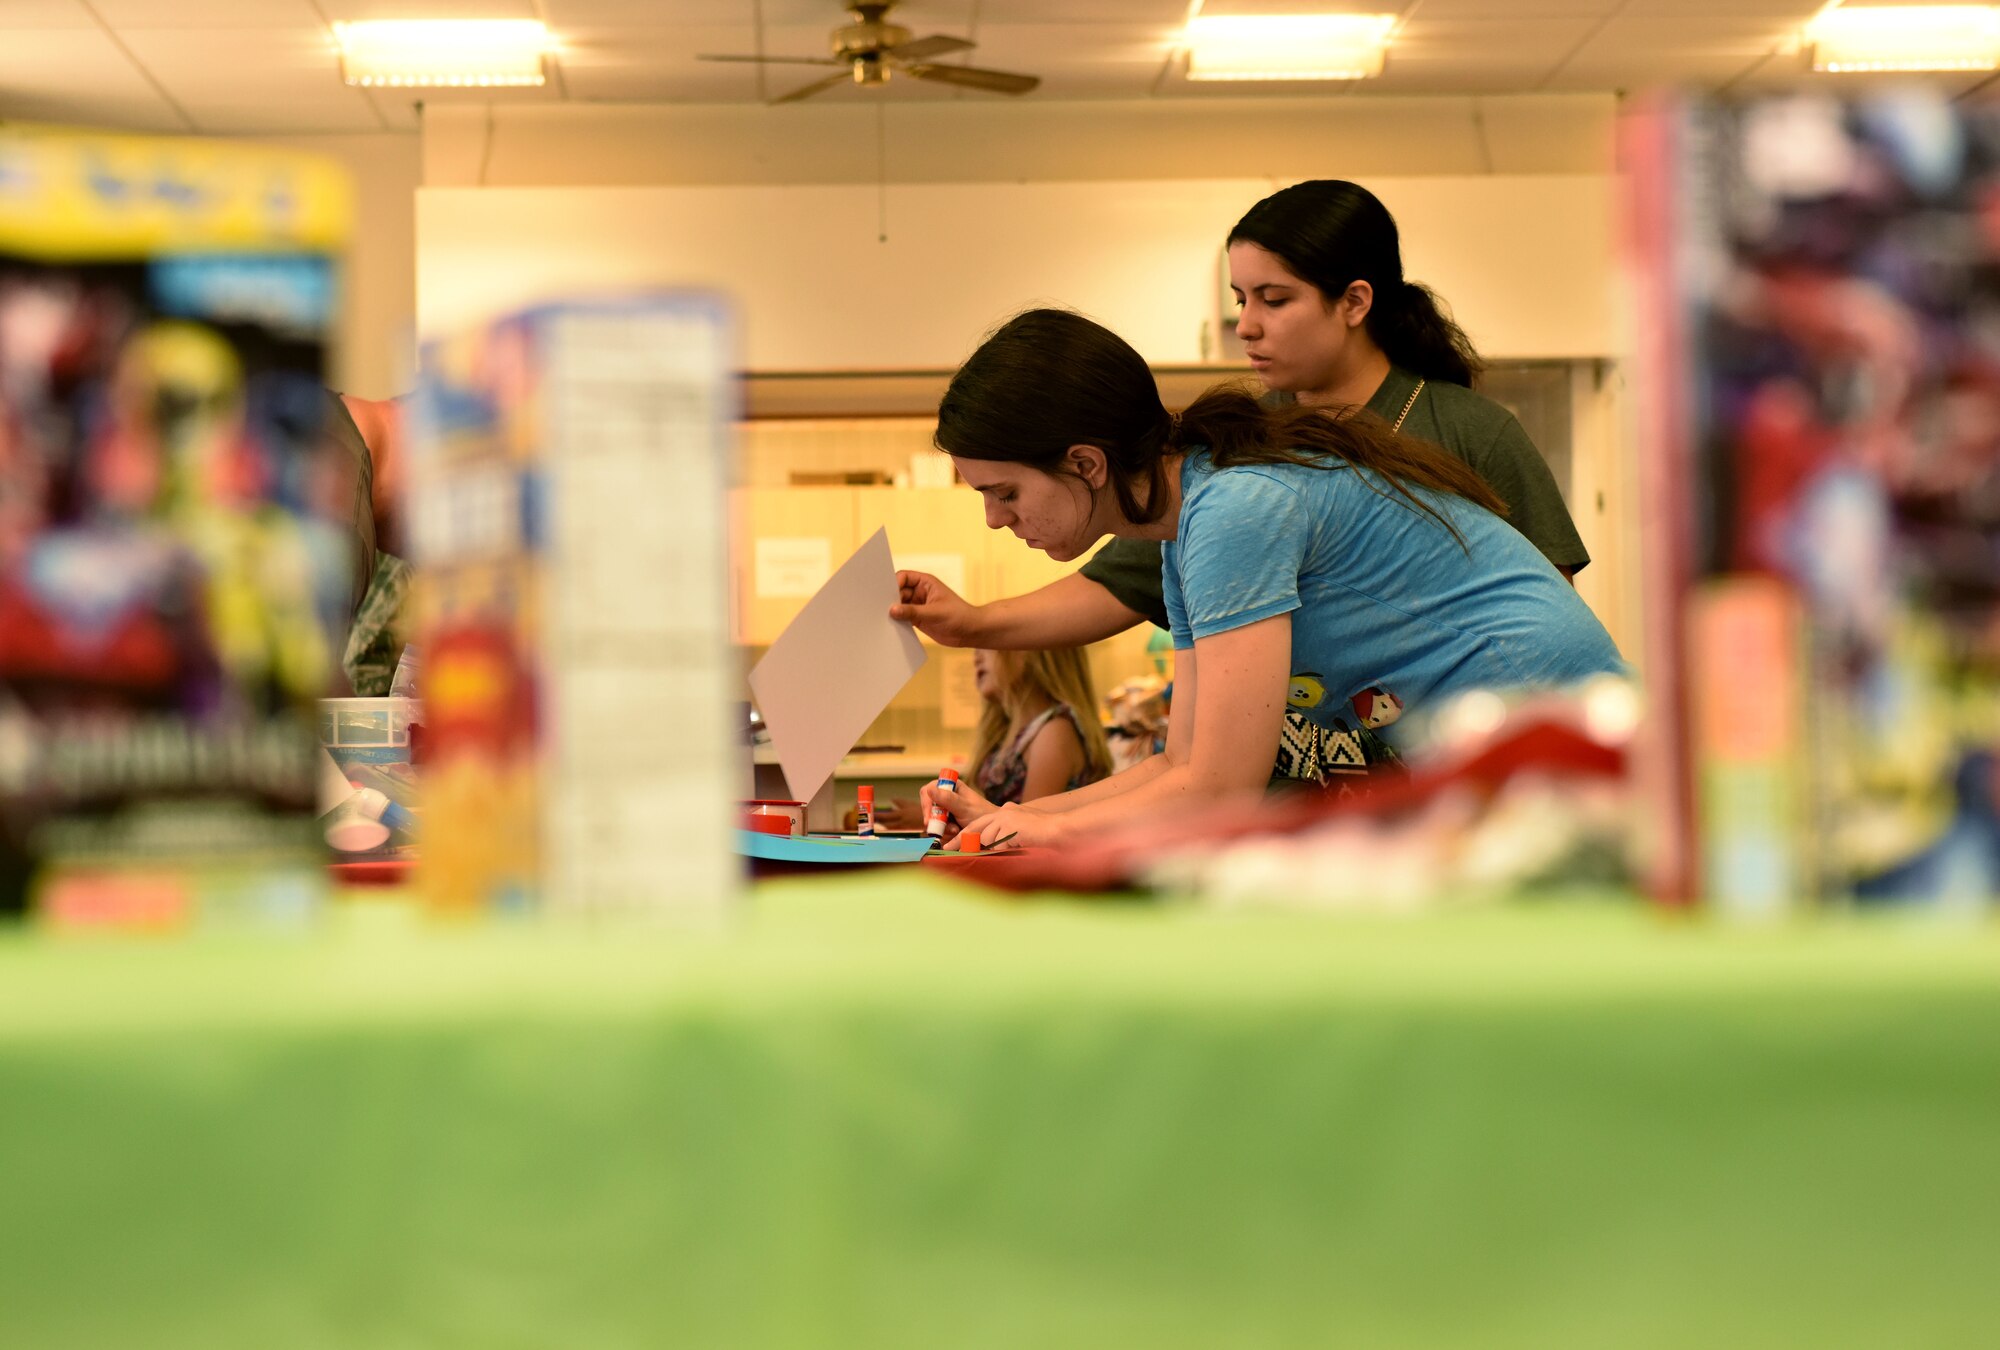 Team Mildenhall children decorate care packages for deployed parents and friends at RAF Mildenhall, England, July 24, 2018. The care packages are decorated and filled with donated snacks and messages from family and friends. (US. Air Force photo by Senior Airman Lexie West)